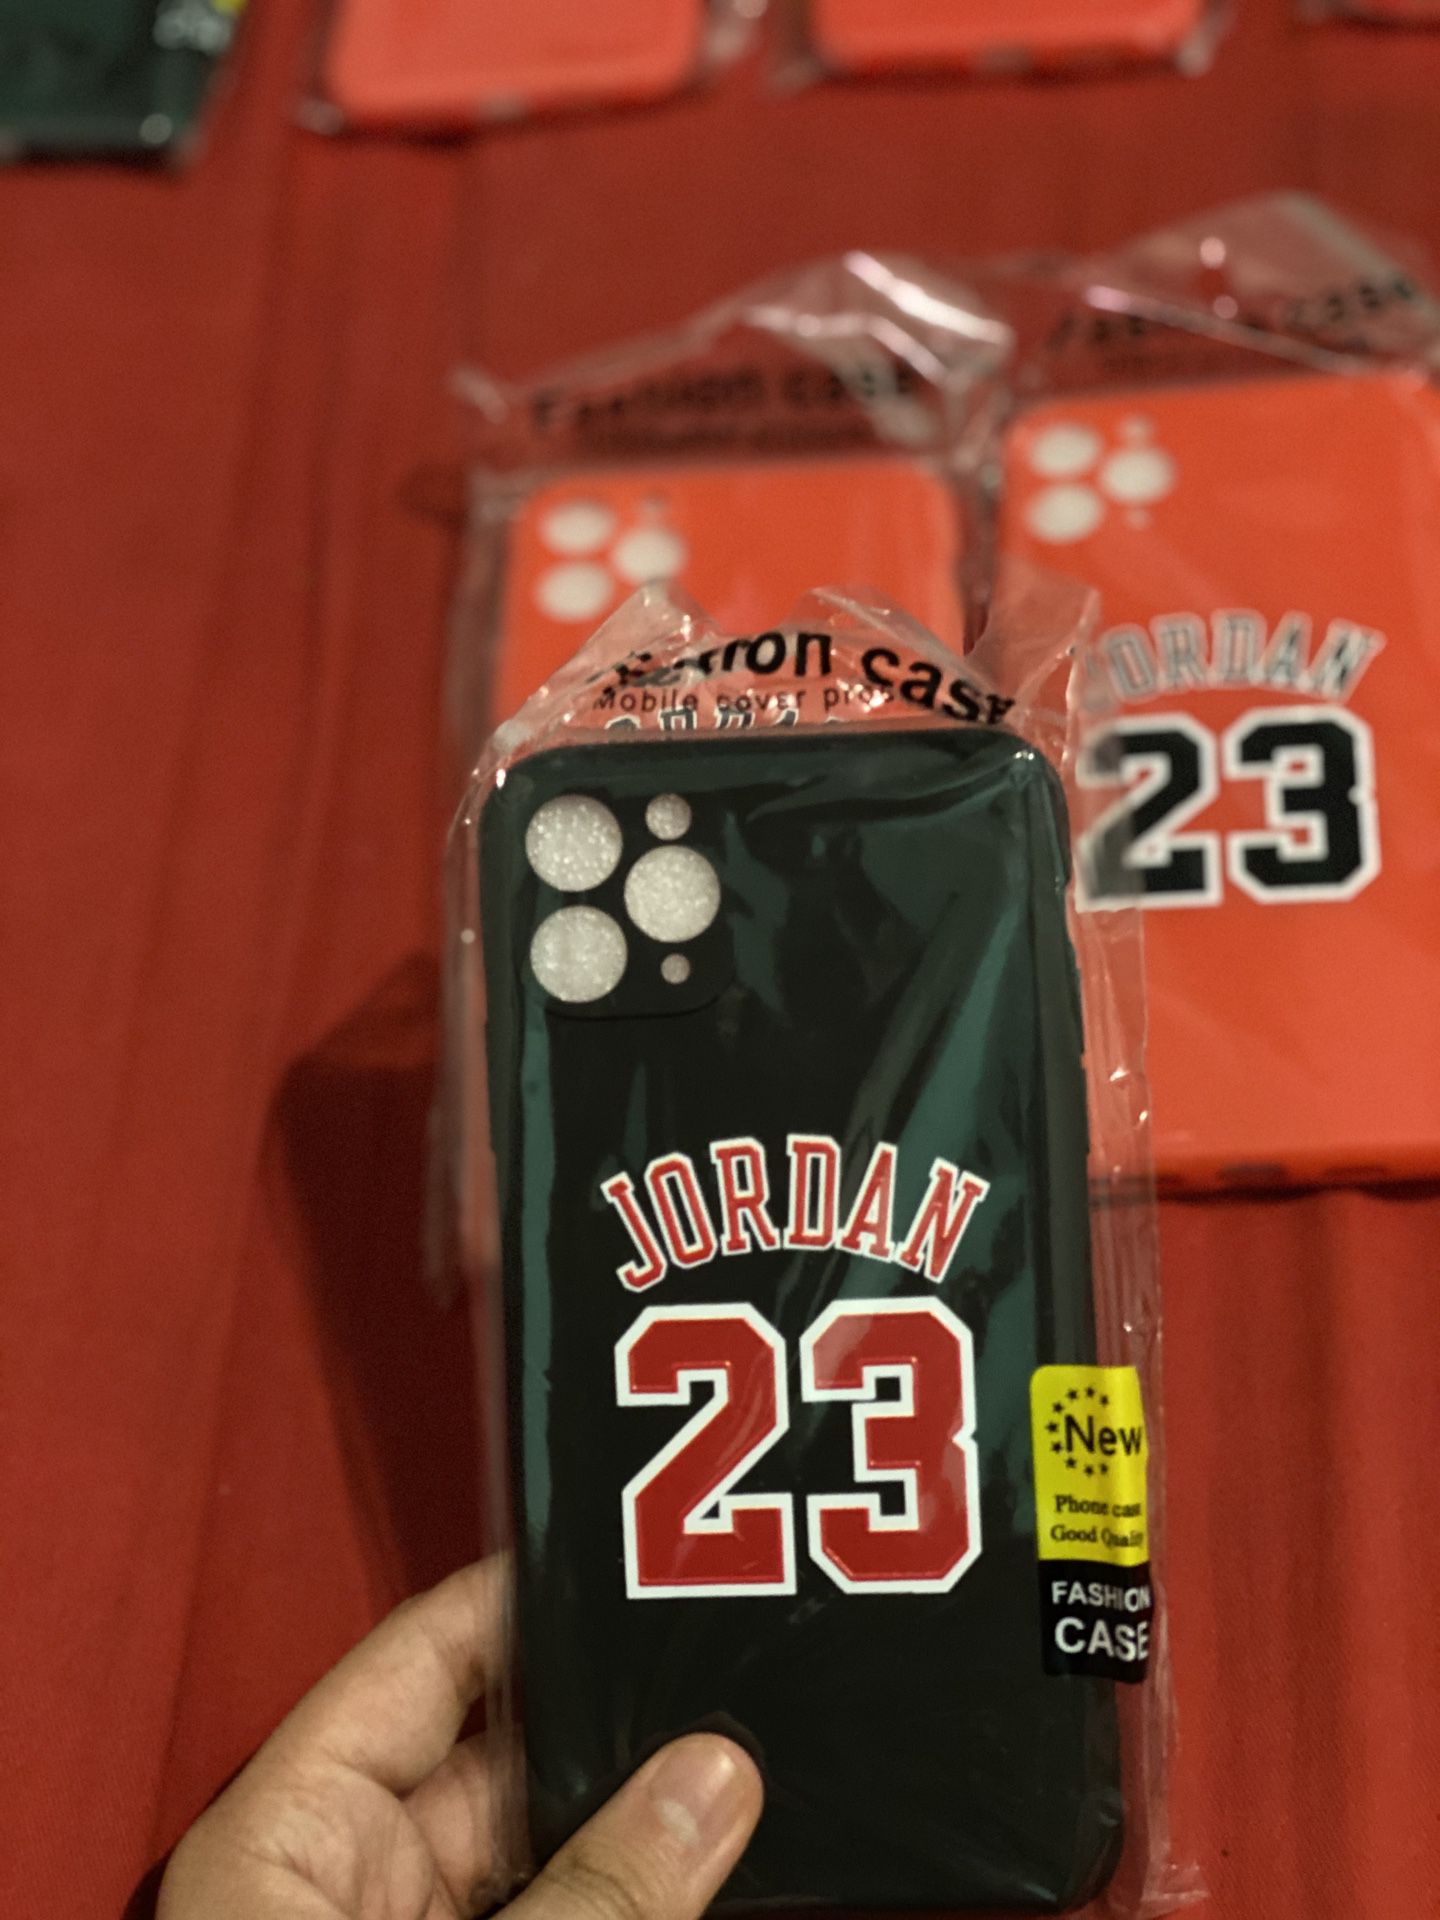 Jordan Brand new cases never used comes in a plastic bag